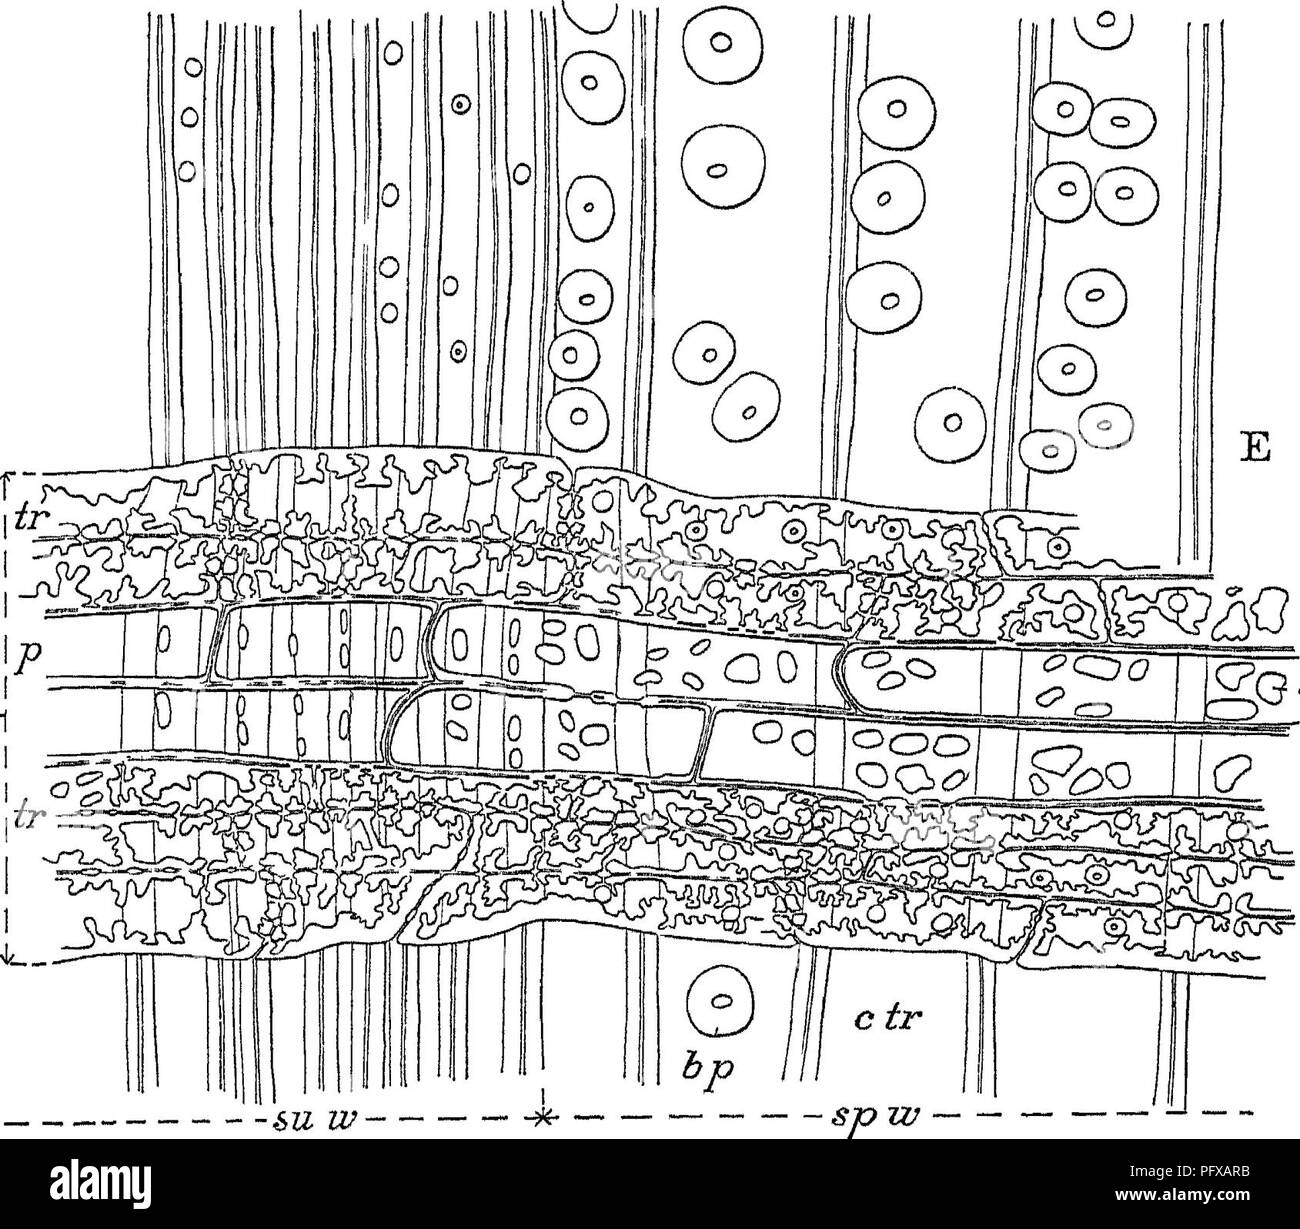 . Report upon the forestry investigations of the U. S. Department of agriculture. 1877-1898. Forests and forestry. 772 2* r^&gt; FiG-a mr-. SZQsp Typical Cross Sections of Pinus palustris and echinata, and Radial Sections of Pinus palustris and glabra A Pinus echinata Cross section of two rings sp w sprmgwood su w summer wood ^„ , B , x1 .. ., ,, I Pinls paiustris Cross section of a very narrow ring Of the two medullary rays one is cut through a iow of paienchyma the other thiough CaMTpiNmoLAMA8 Radial sections mr medullary rays tr tracheids of the medullary rays p parenchyma of the same, * p Stock Photo